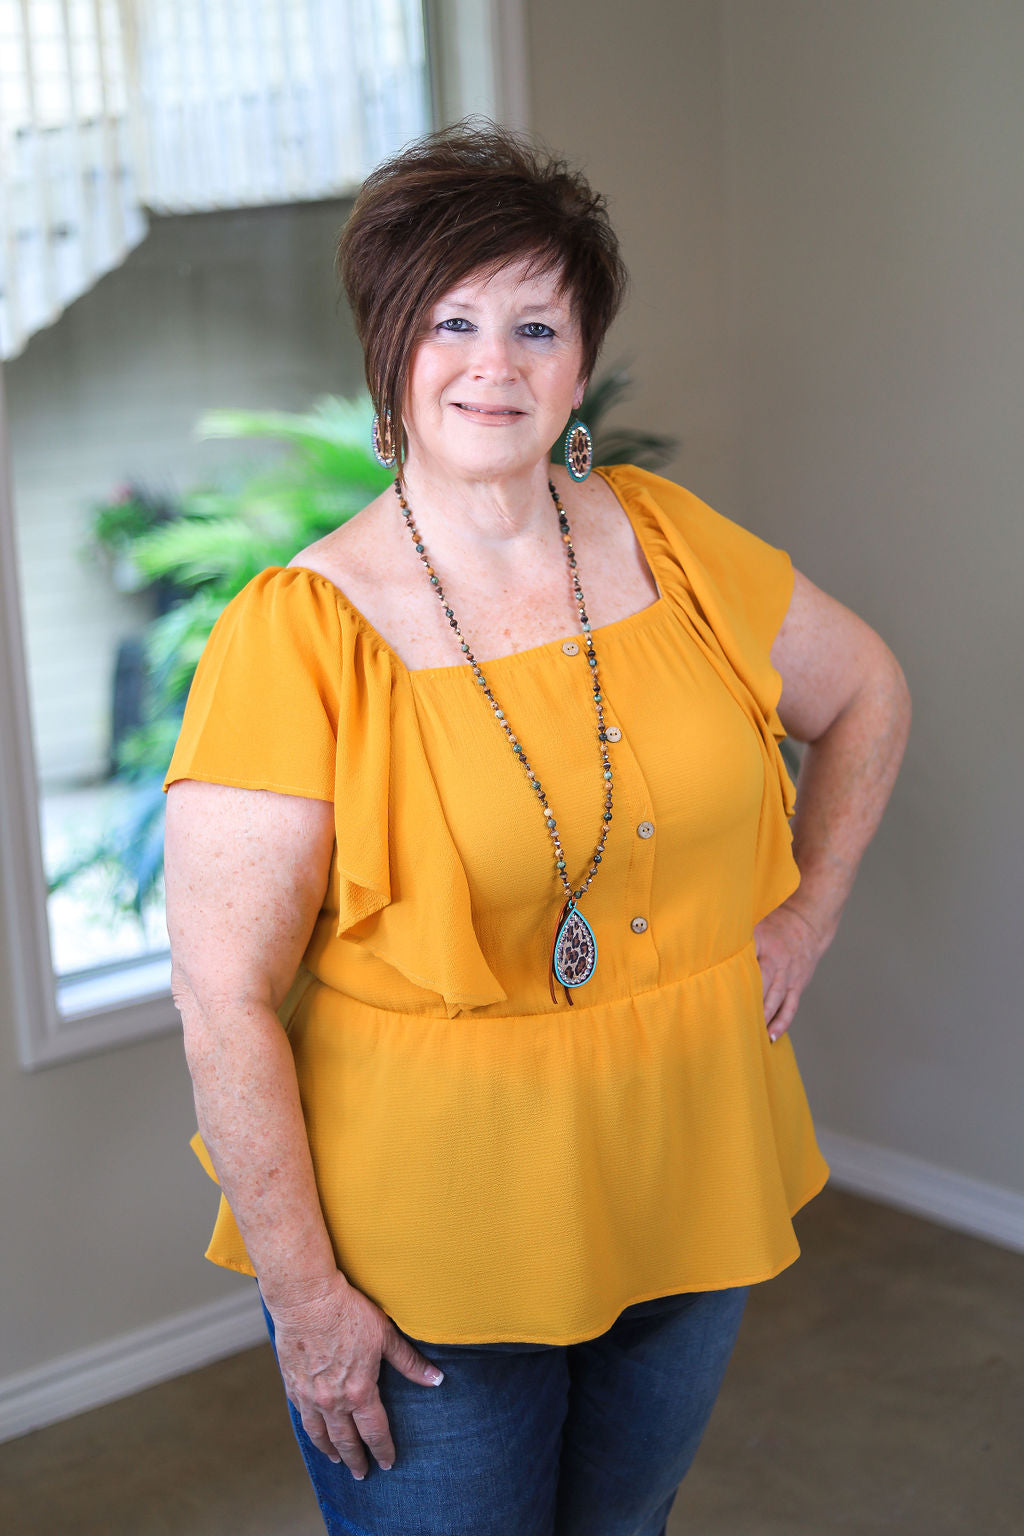 Last Chance Size 3XL | Plus Size | Resounding Success Peplum Top with Button Detail in Mustard Yellow - Giddy Up Glamour Boutique